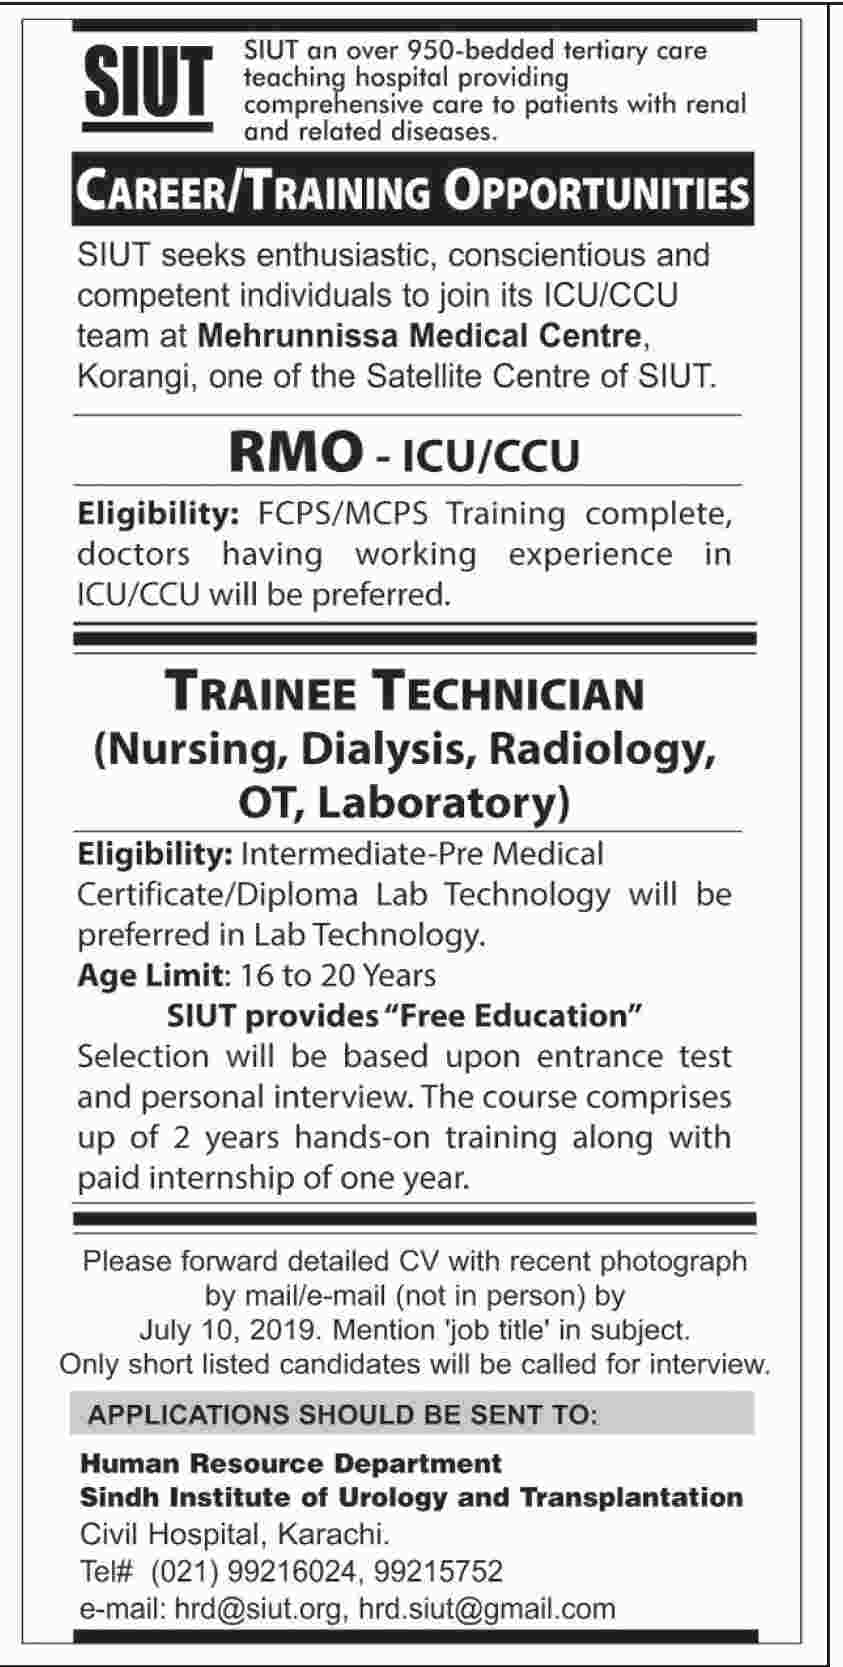 Sindh Institute of Urology and Transplantation jobs 2019